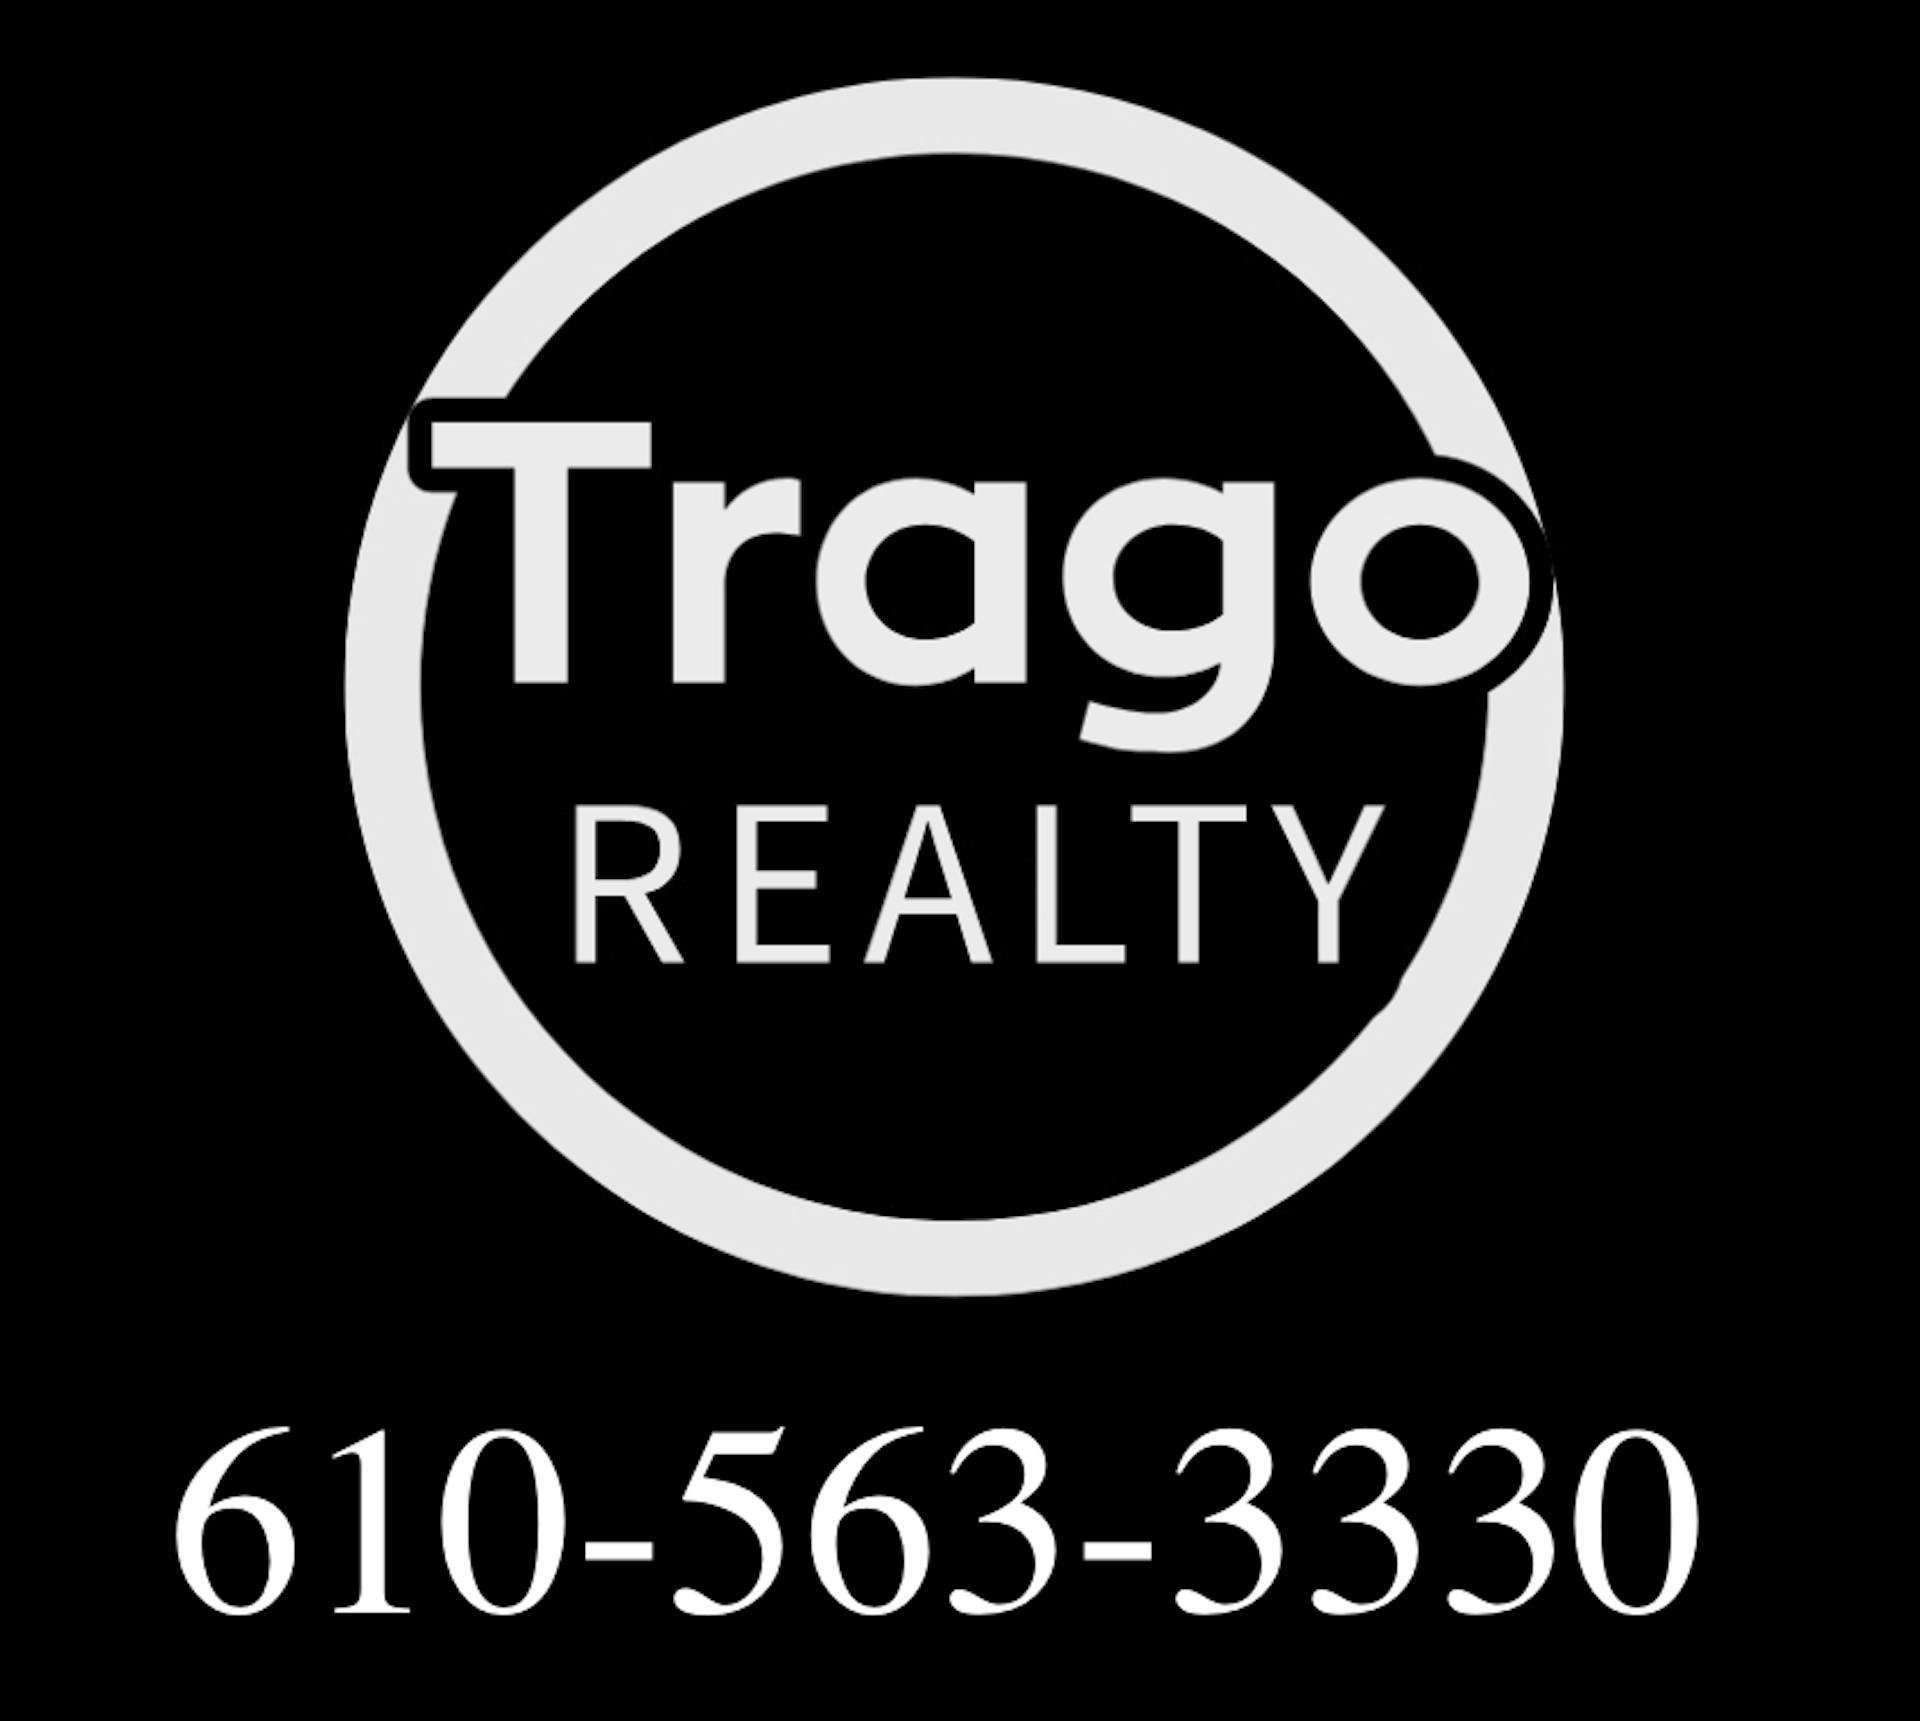 Trago Realty - 610-563-3330 - One Sign - One Telephone Number